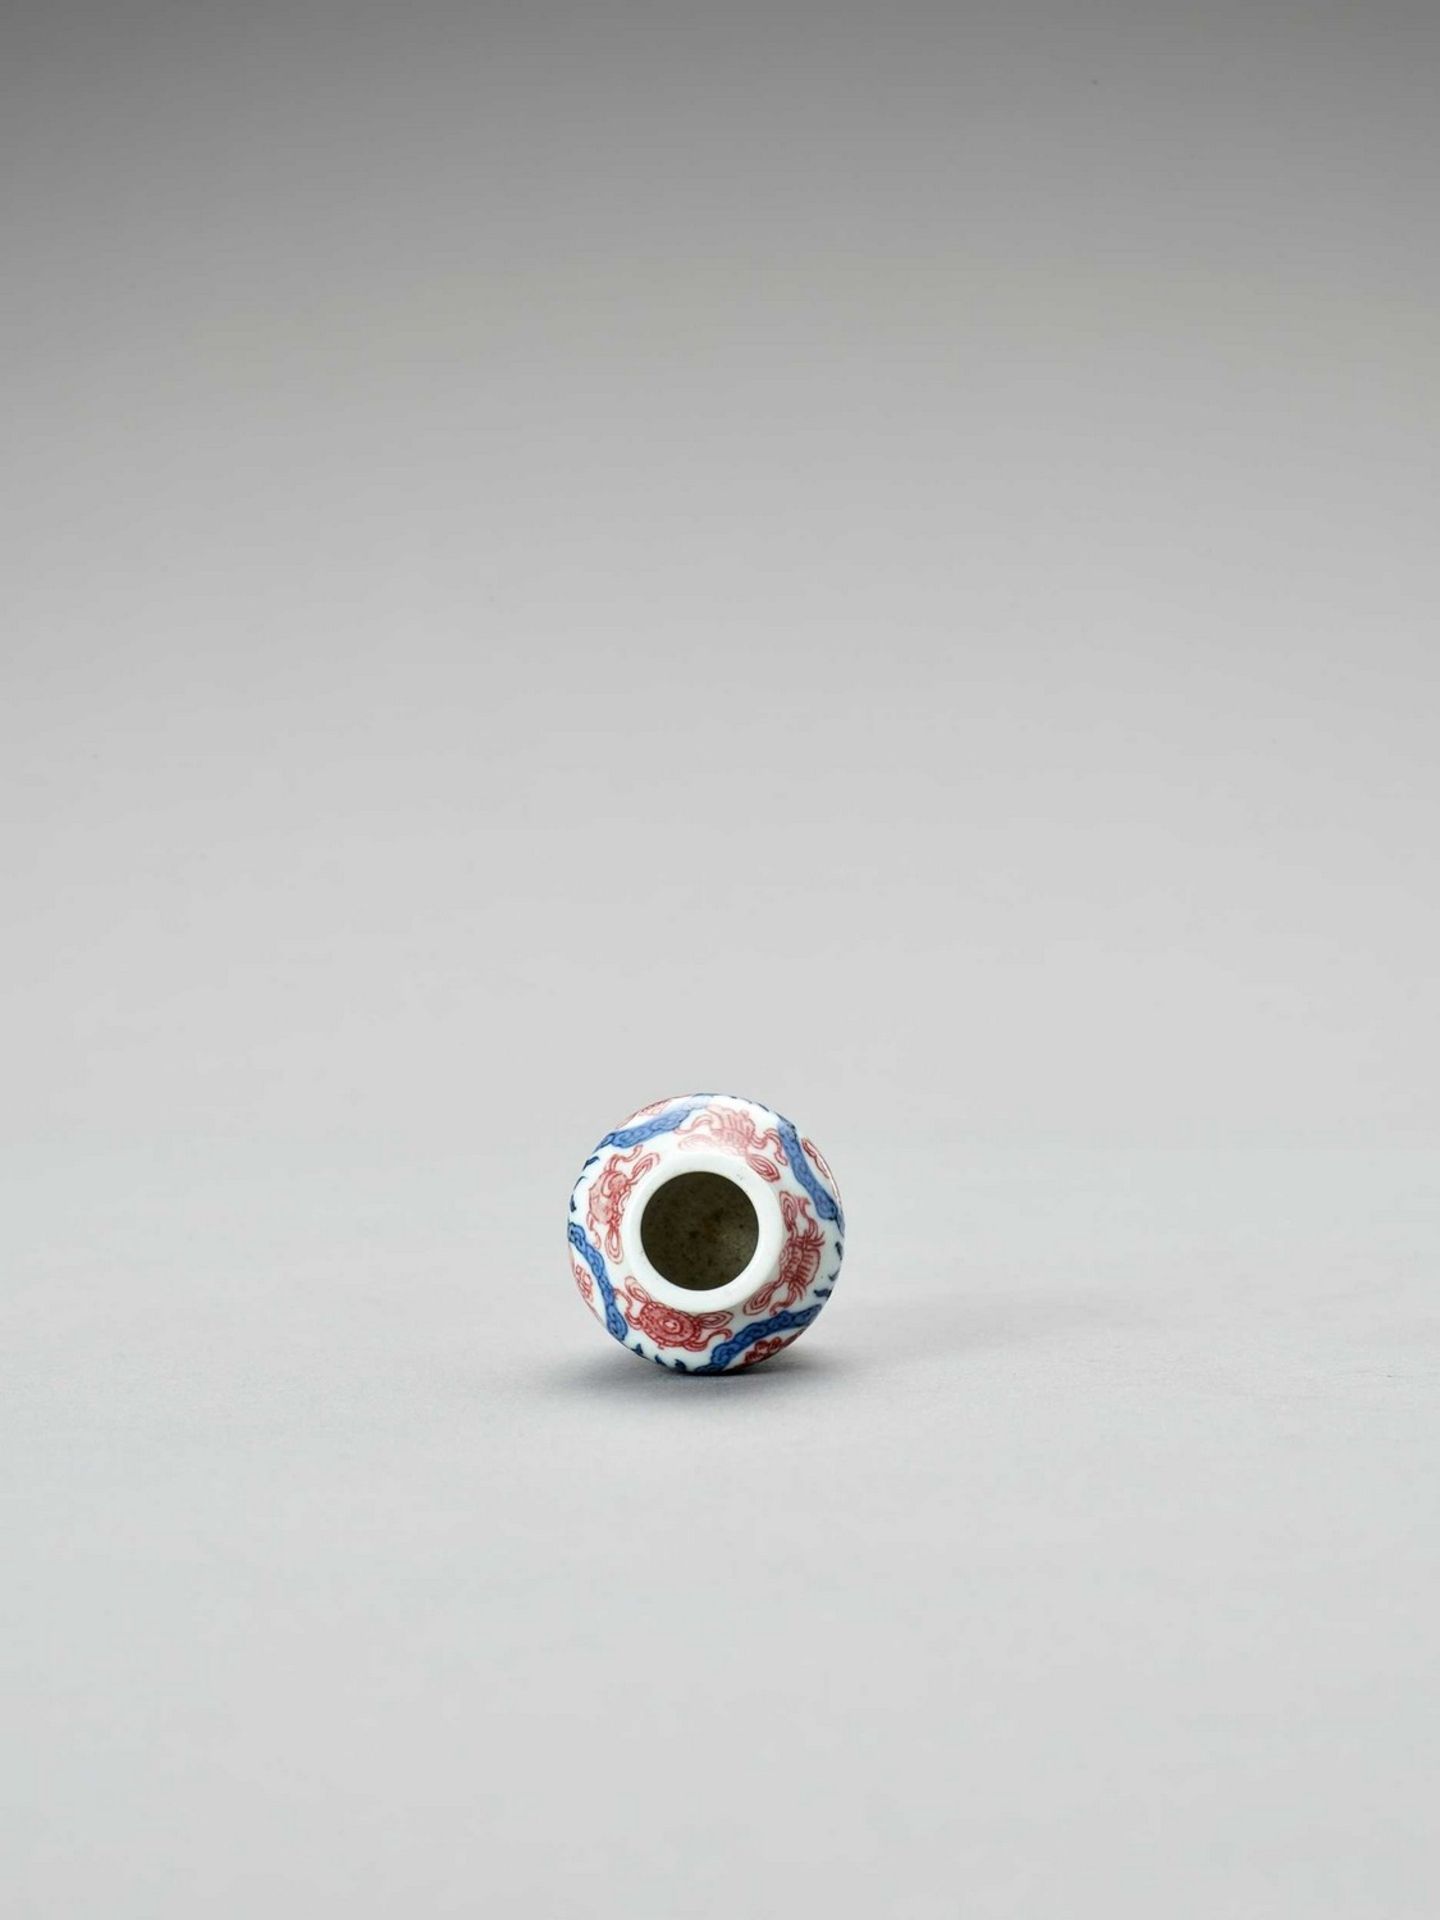 AN IRON-RED, BLUE AND WHITE PORCELAIN SNUFF BOTTLE - Image 5 of 6